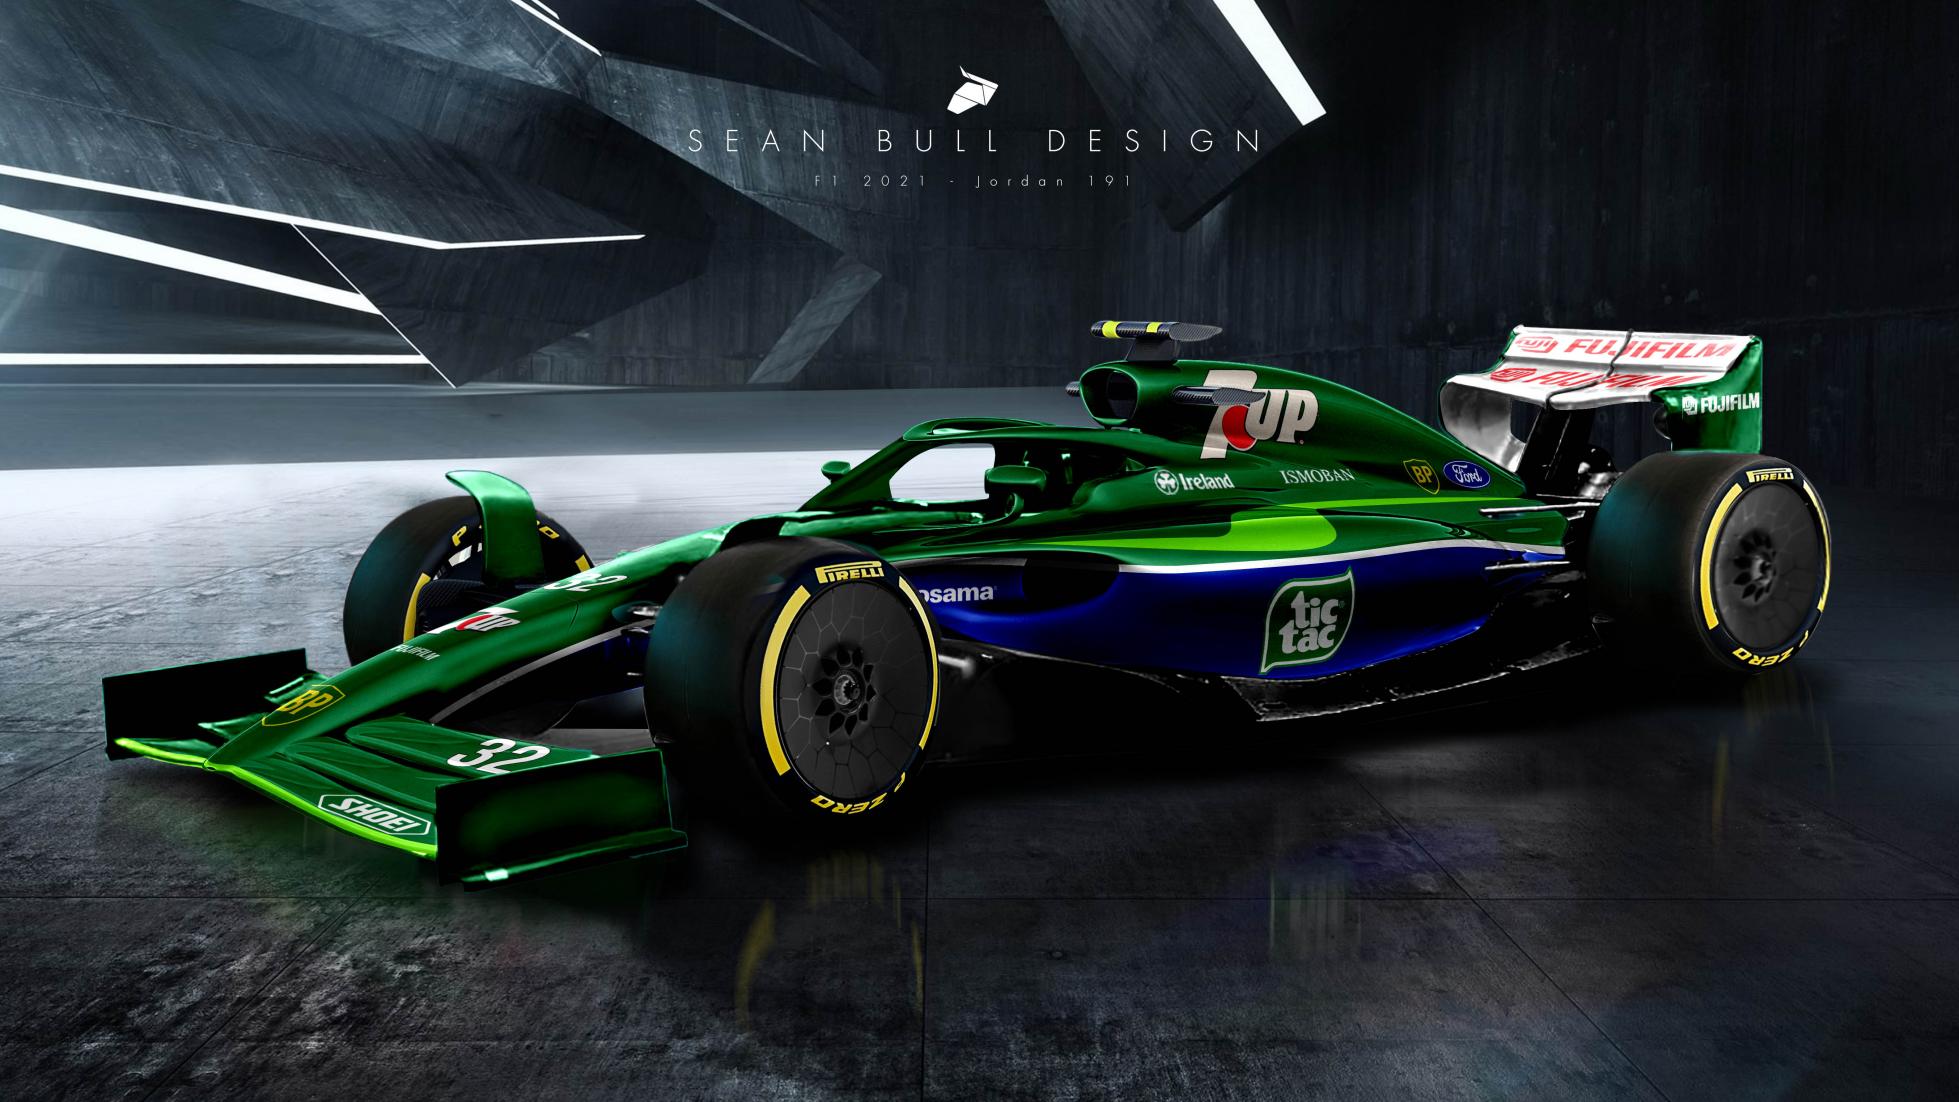 TopGear Here’s a better, unofficial look at 2021’s Formula 1 cars